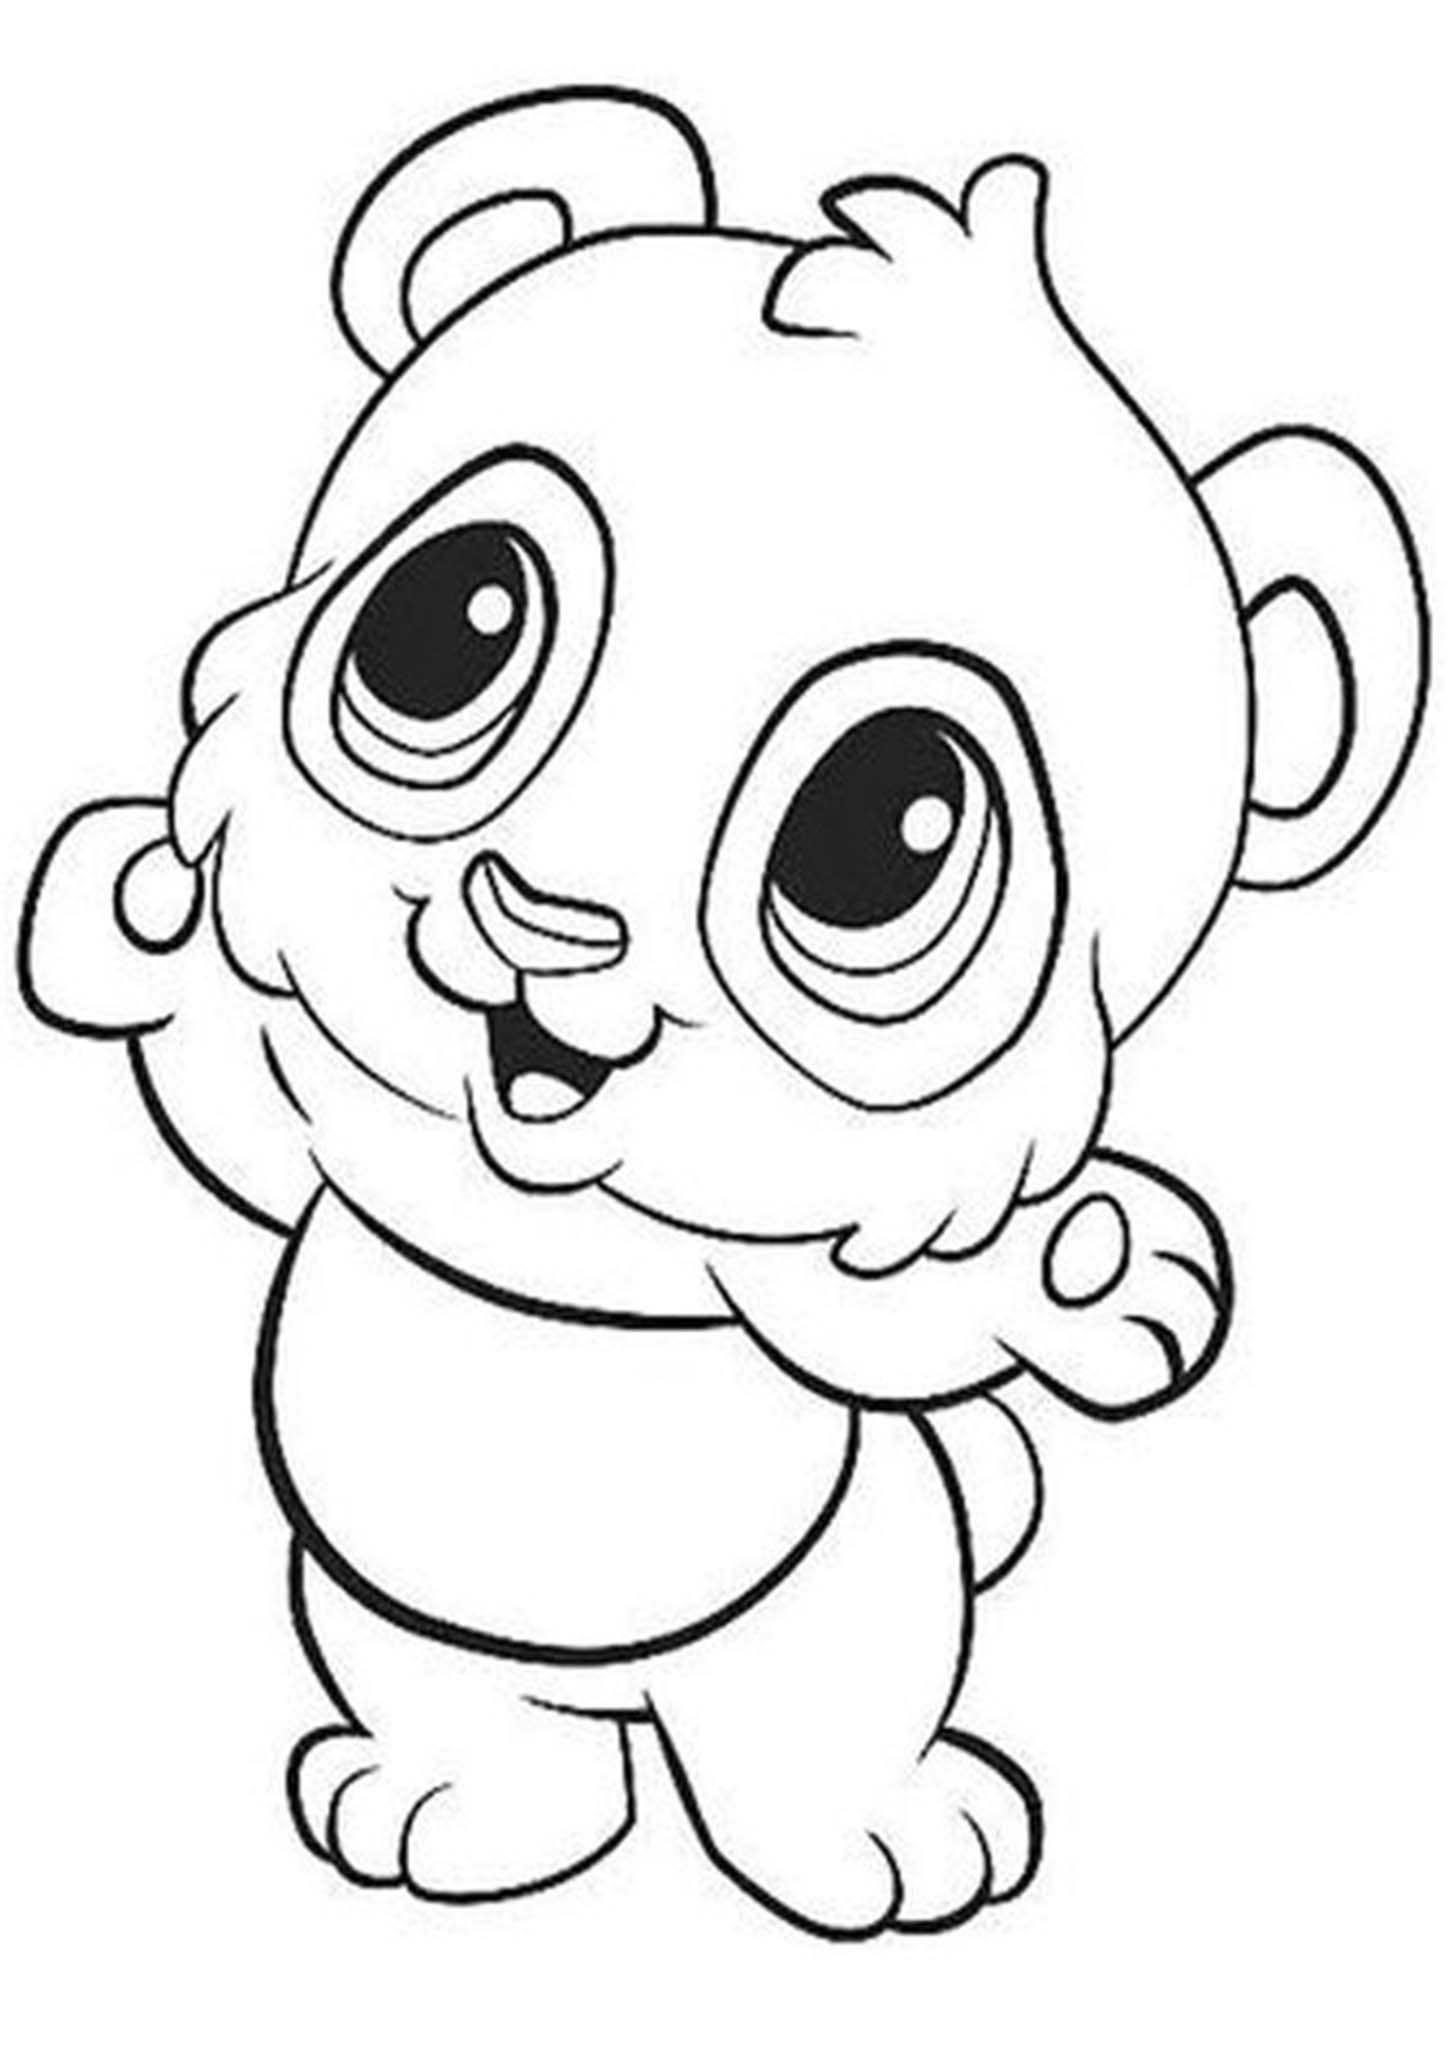 Download Free & Easy To Print Panda Coloring Pages - Tulamama